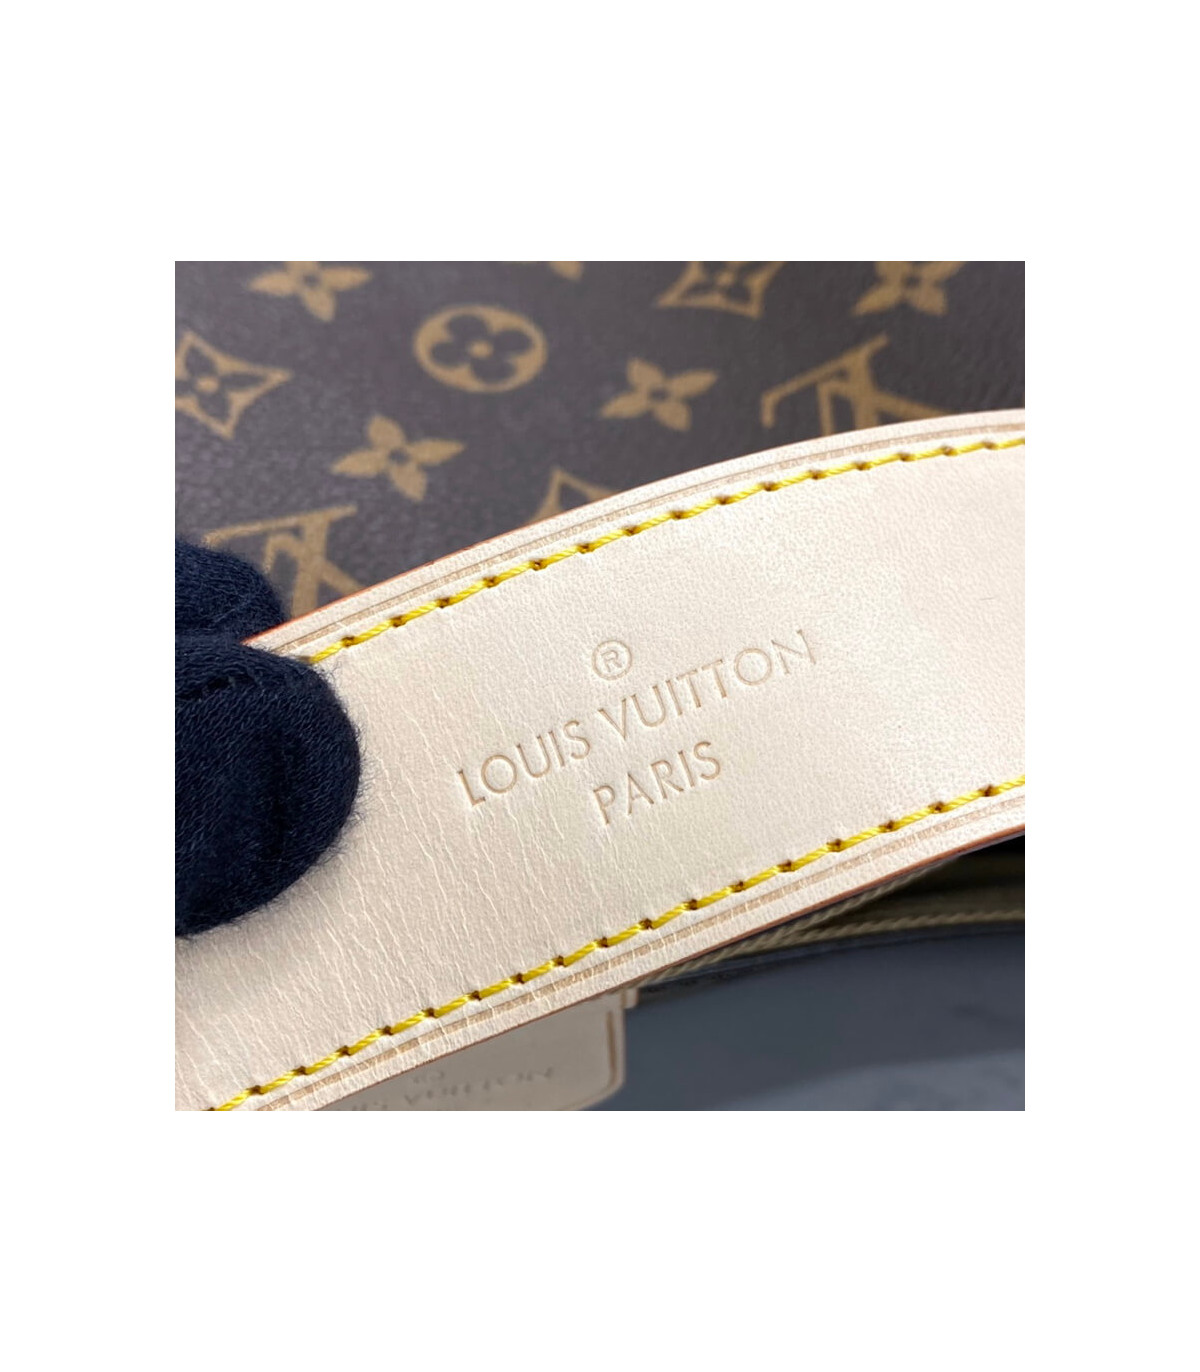 Louis Vuitton Monogram Canvas Graceful MM Beige M43704 is practical, looks  better than ever and…